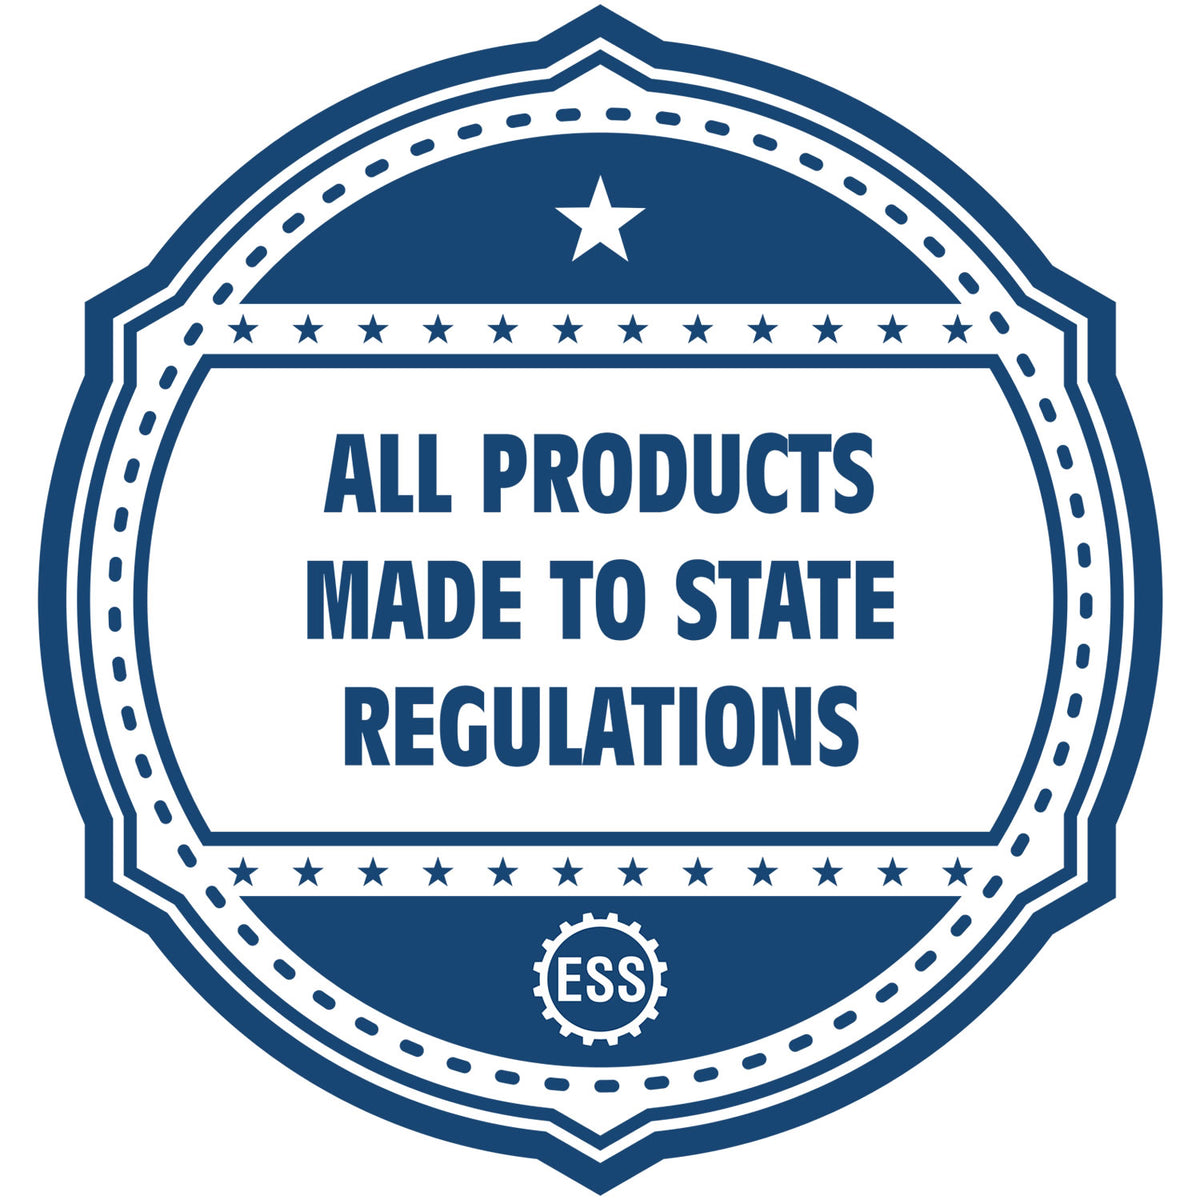 An icon or badge element for the Slim Pre-Inked Massachusetts Landscape Architect Seal Stamp showing that this product is made in compliance with state regulations.